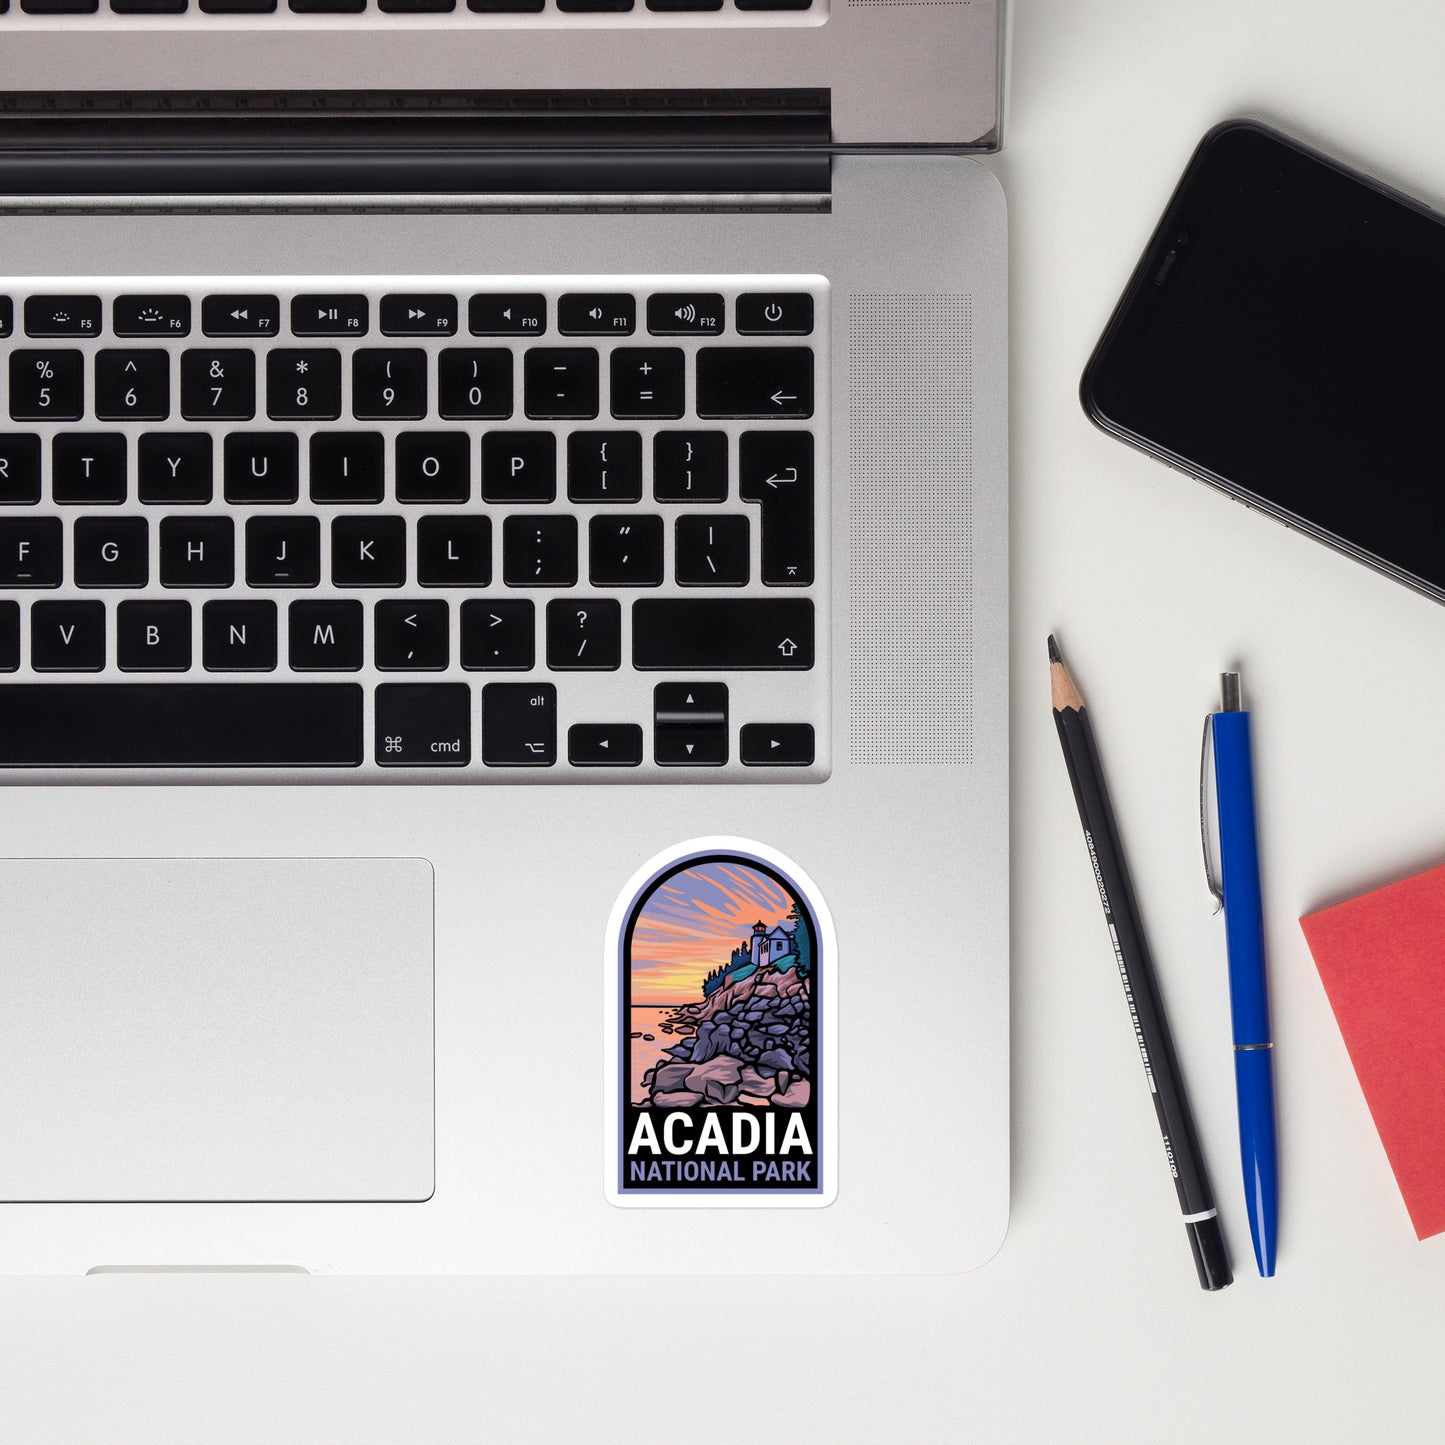 A sticker of Acadia National Park on a laptop